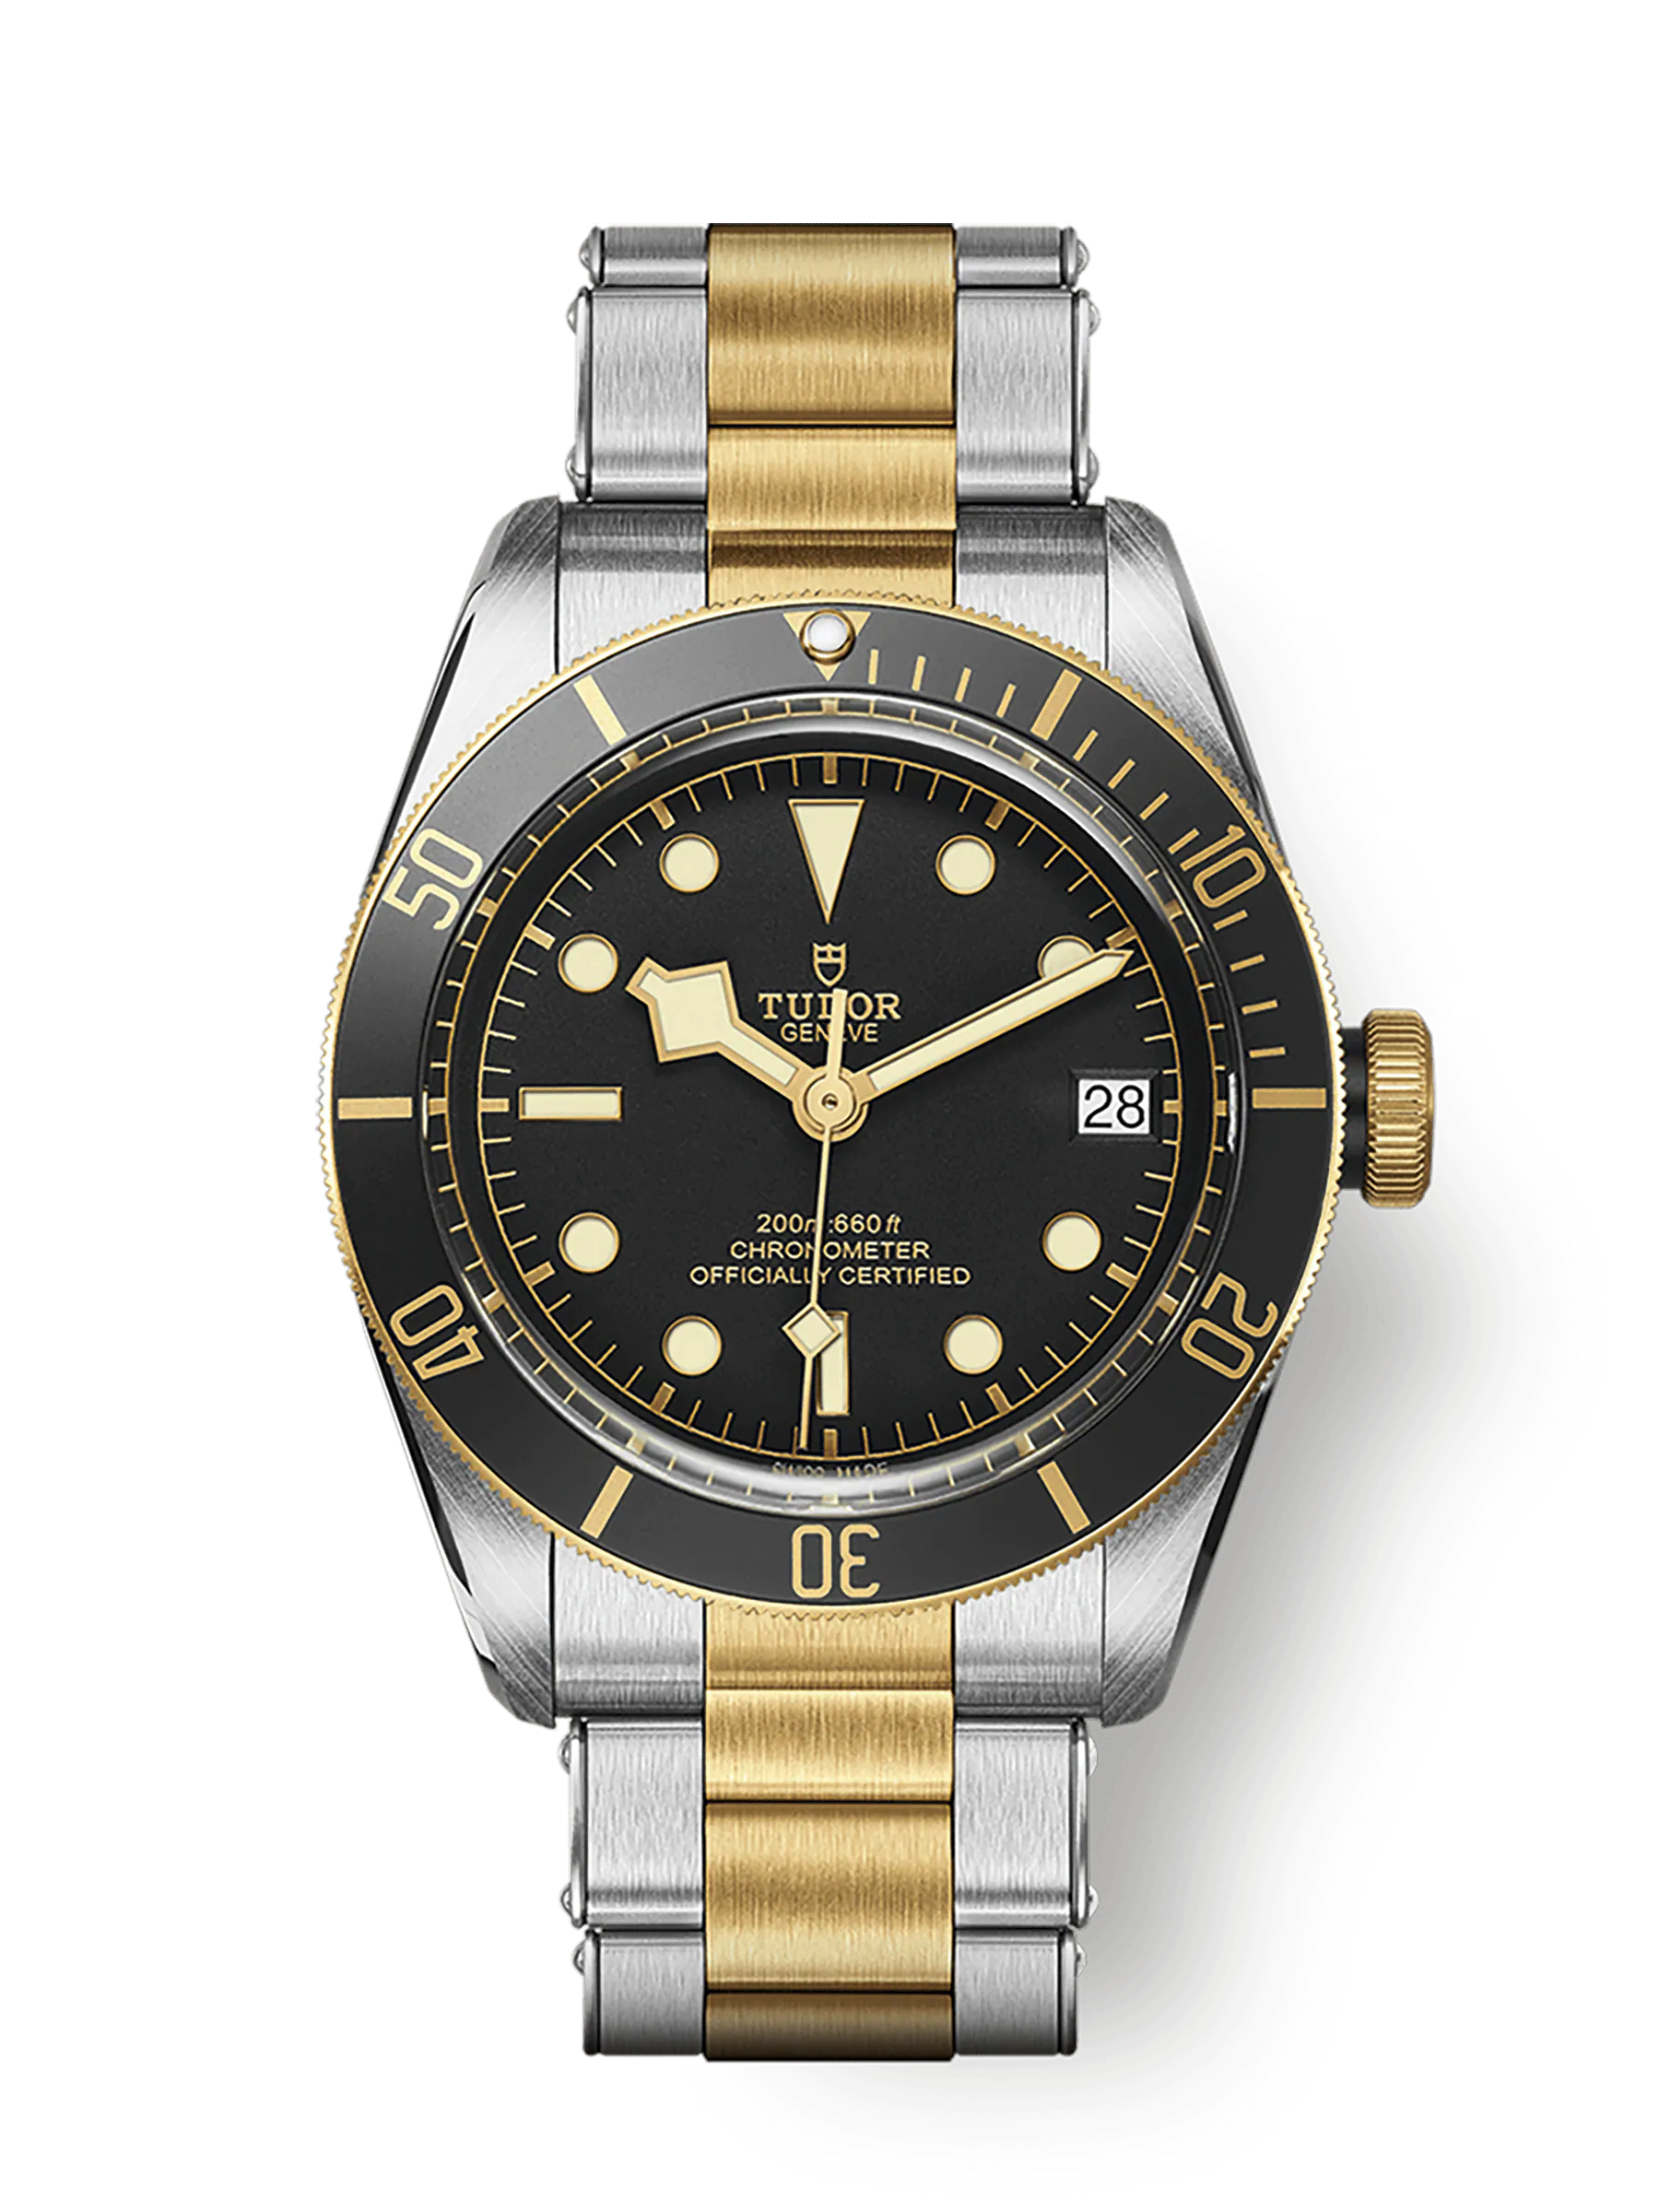 Tudor Black Bay S&G, 41mm, Stainless Steel and 18k Yellow Gold, Ref# M79733N-0008